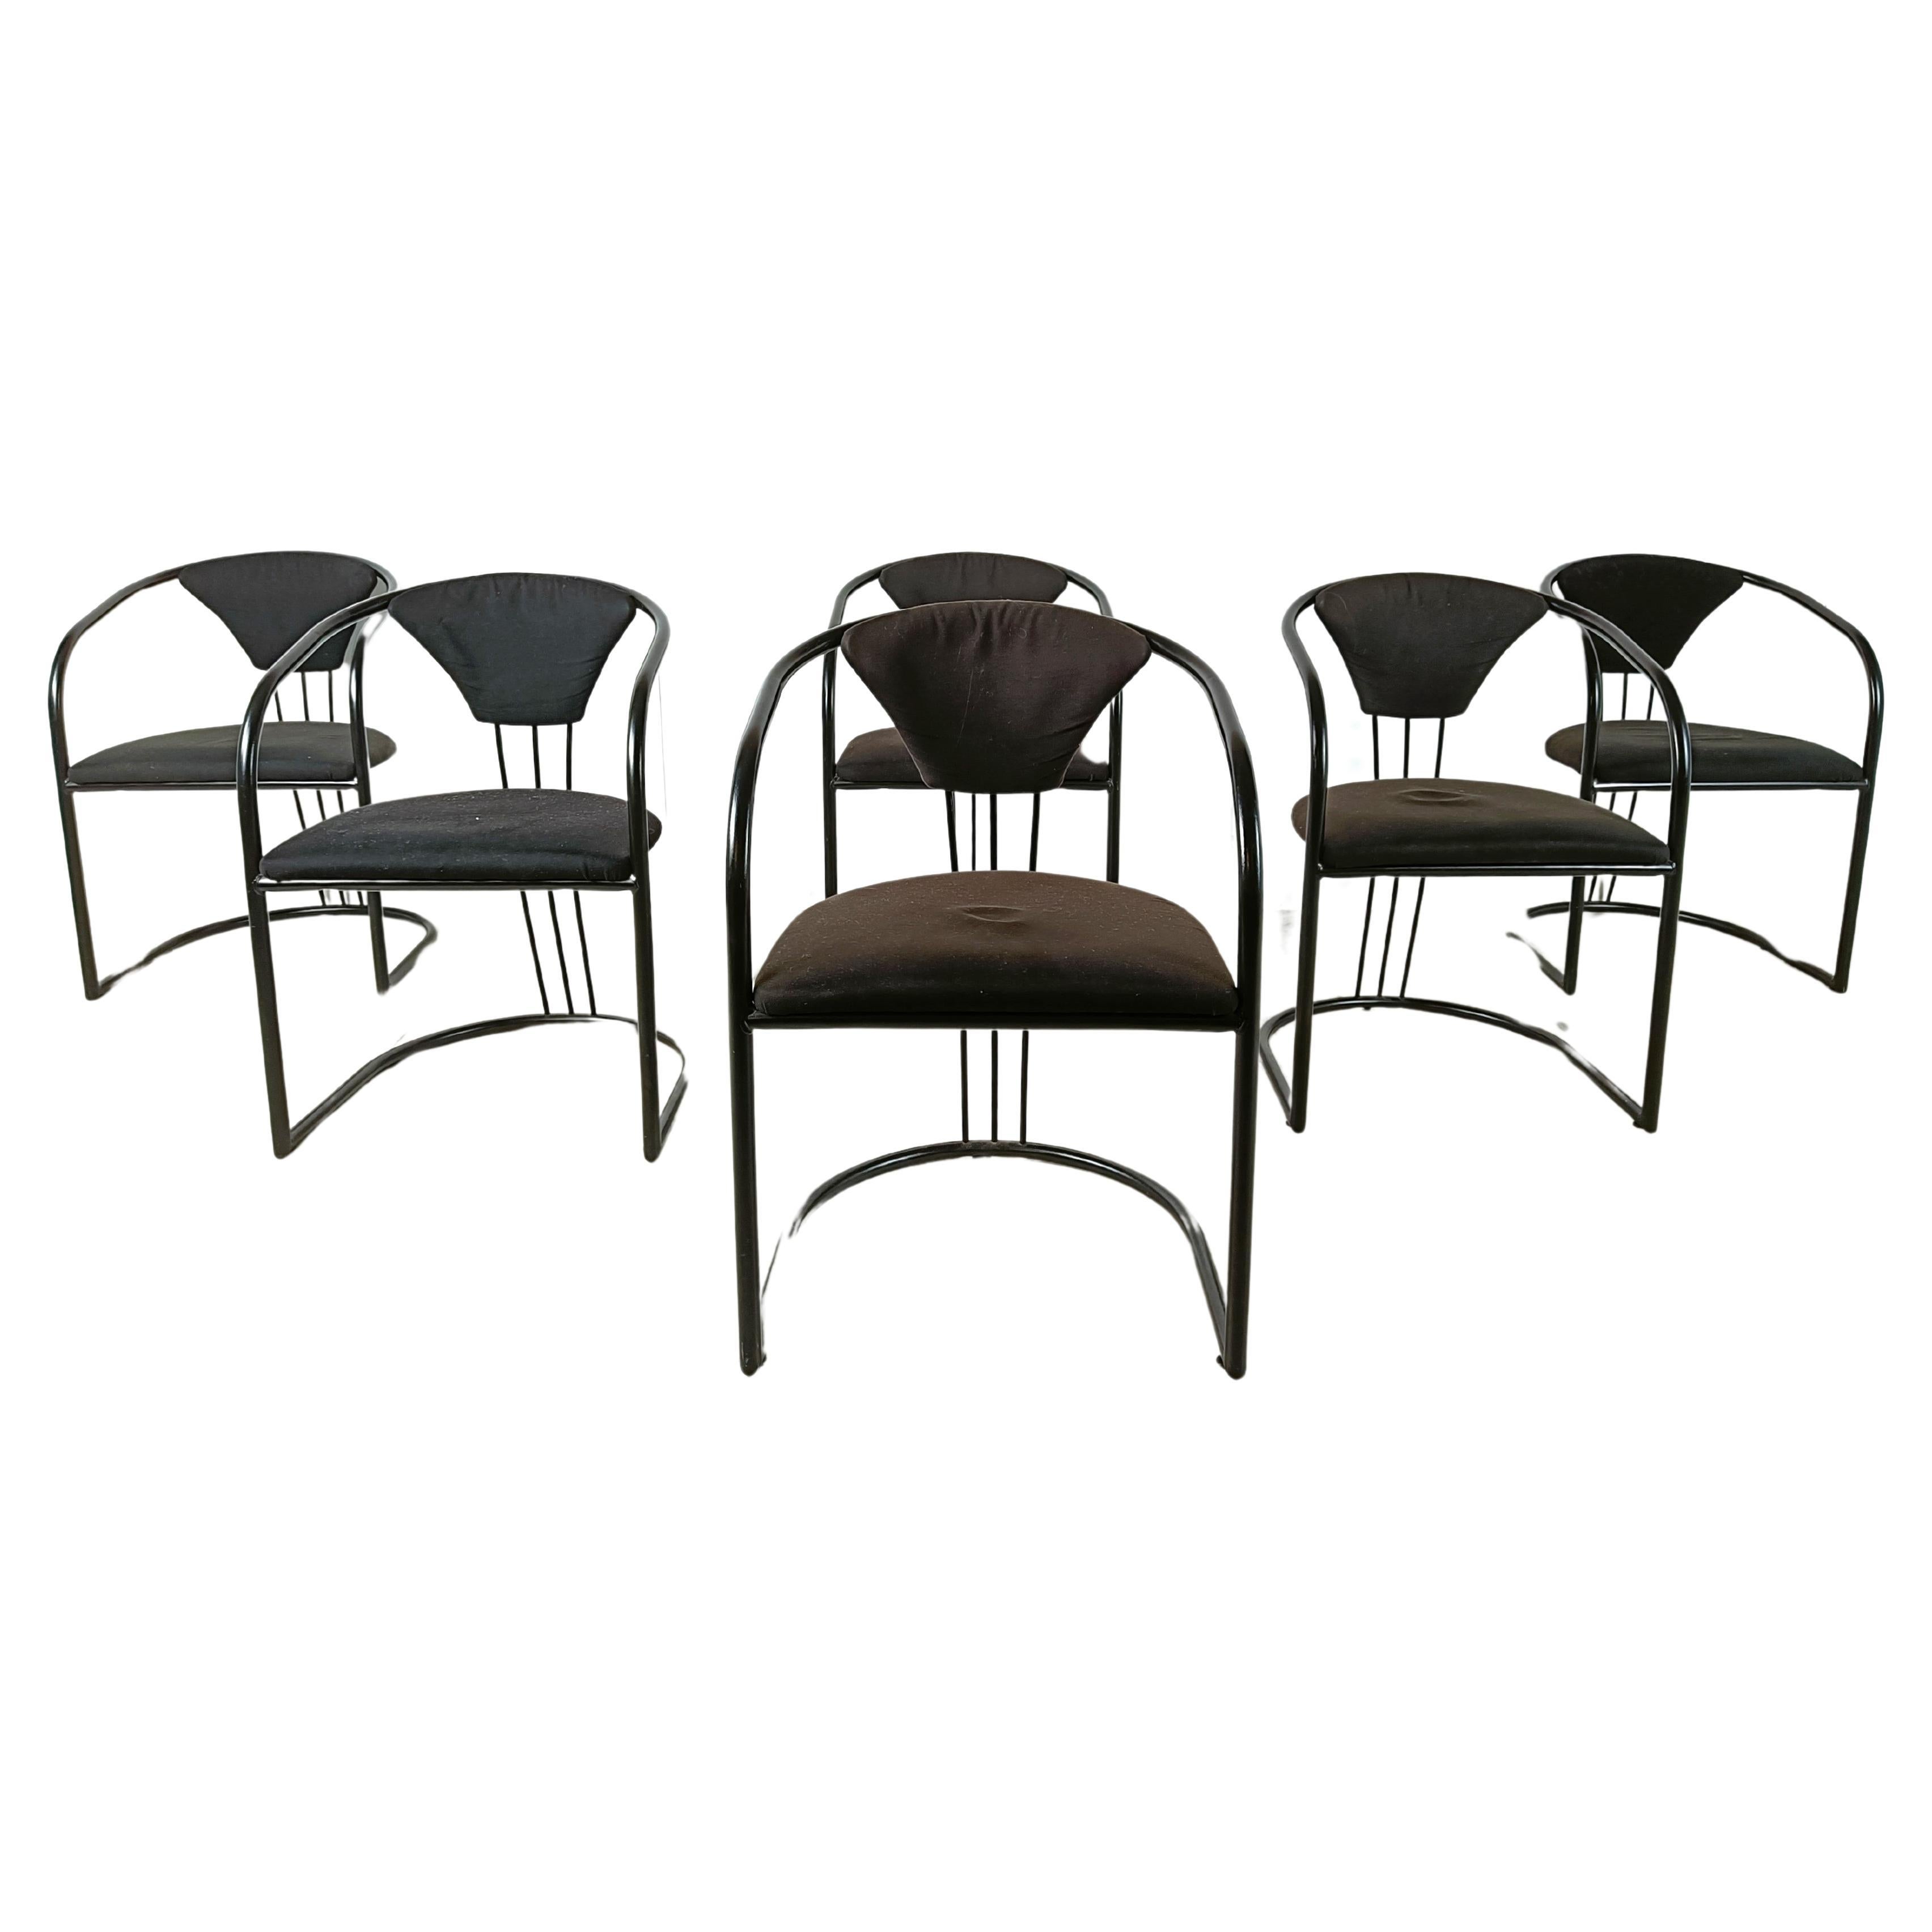 Italian Postmodern dining chairs, 1980s - set of 6 For Sale